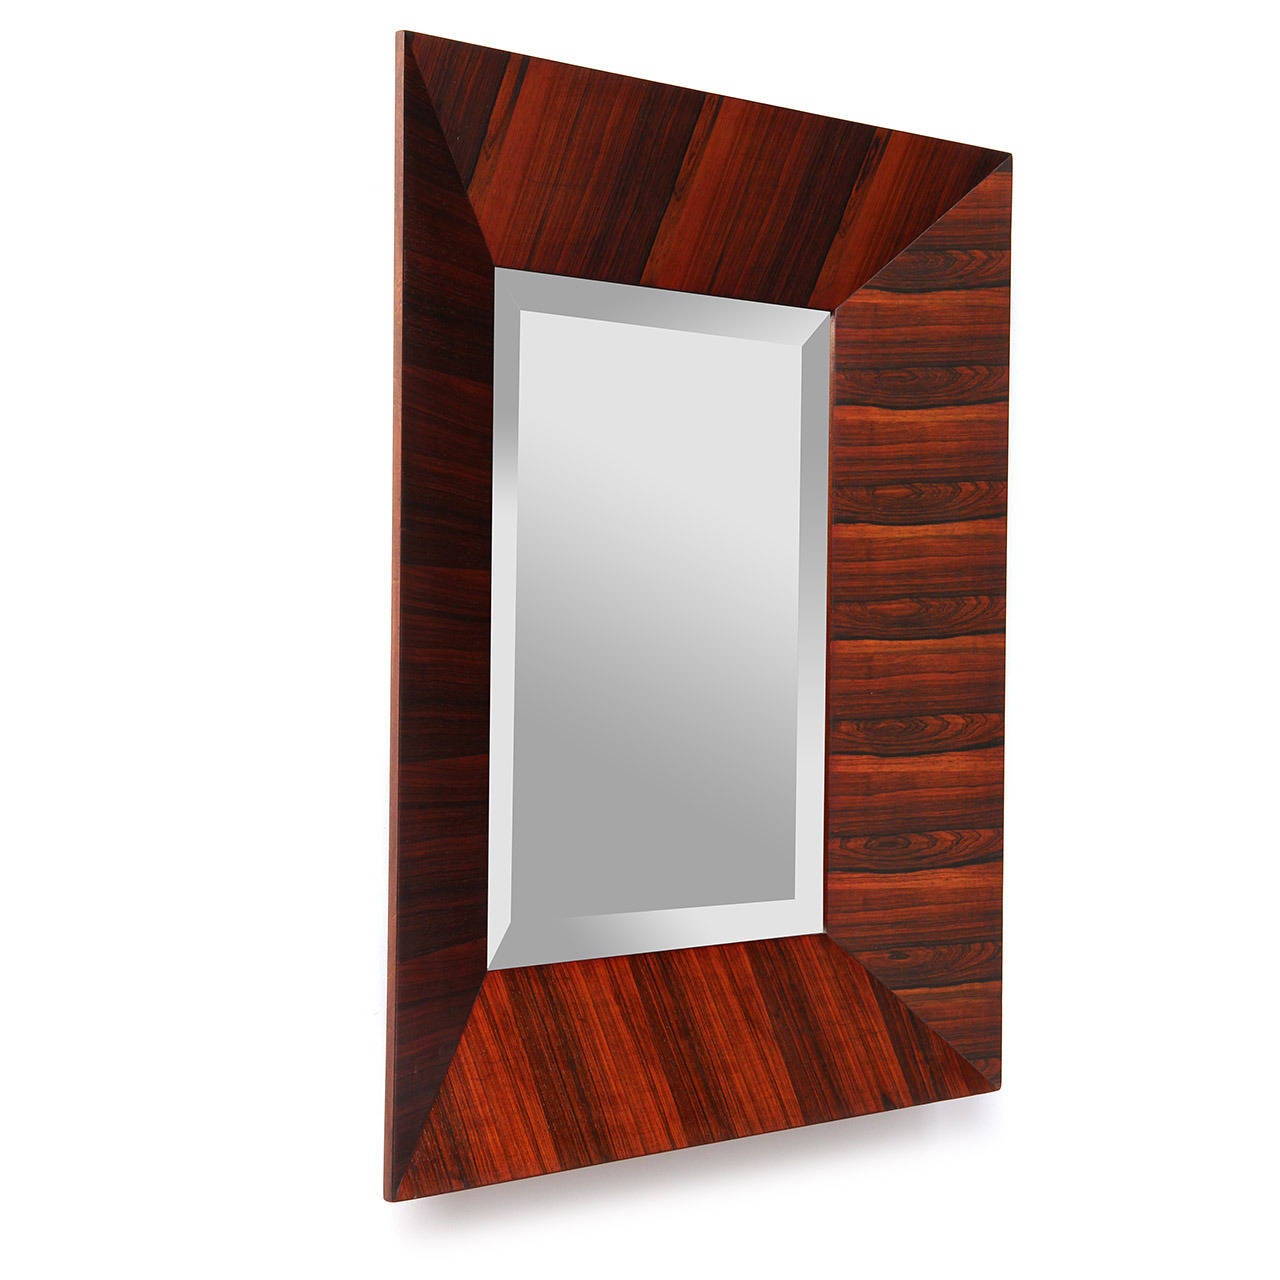 A scarce and expressive rectangular beveled glass wall mirror crafted of highly figured Brazilian rosewood having a beveled, projecting frame with diagonal joinery.